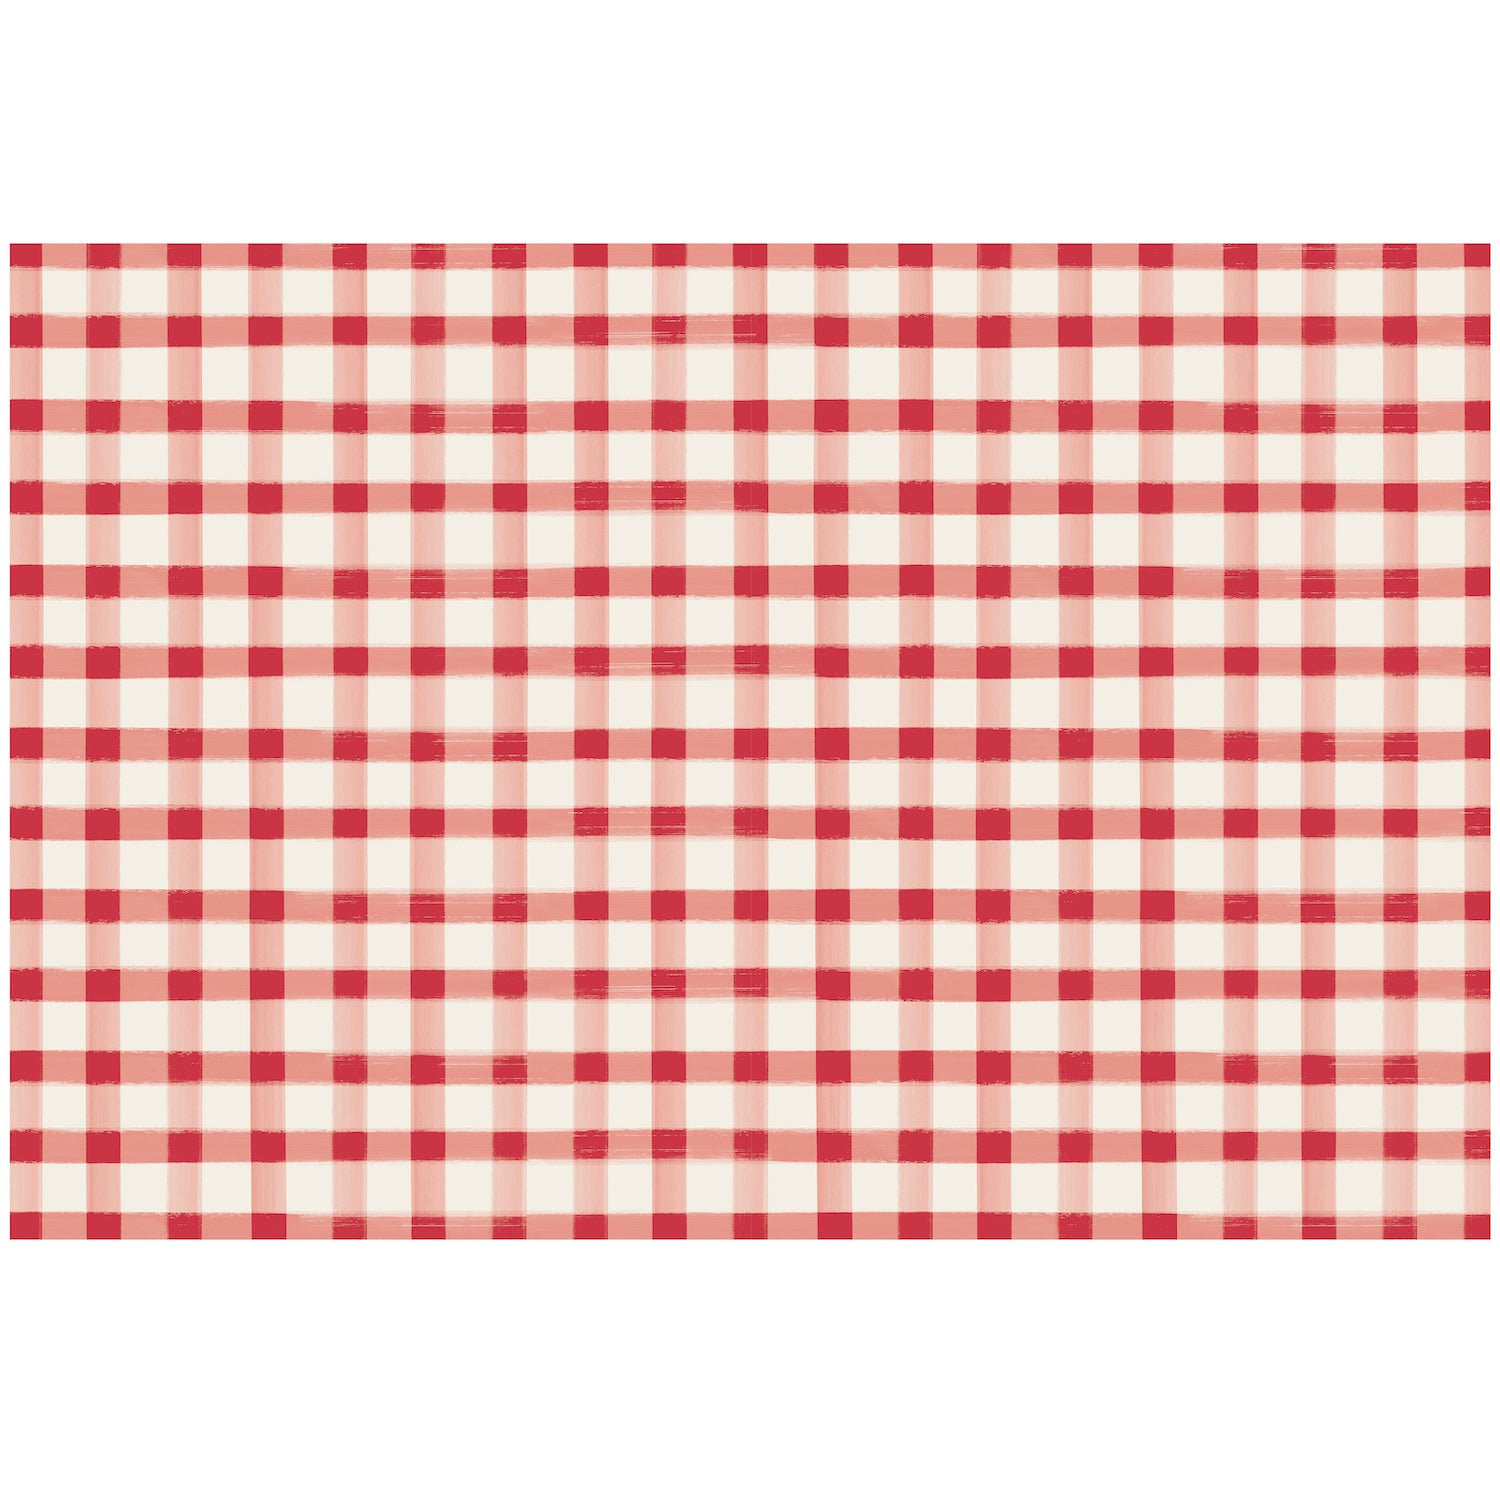 A painted gingham grid check pattern made of light red lines intersecting at deep red squares, on a white background.